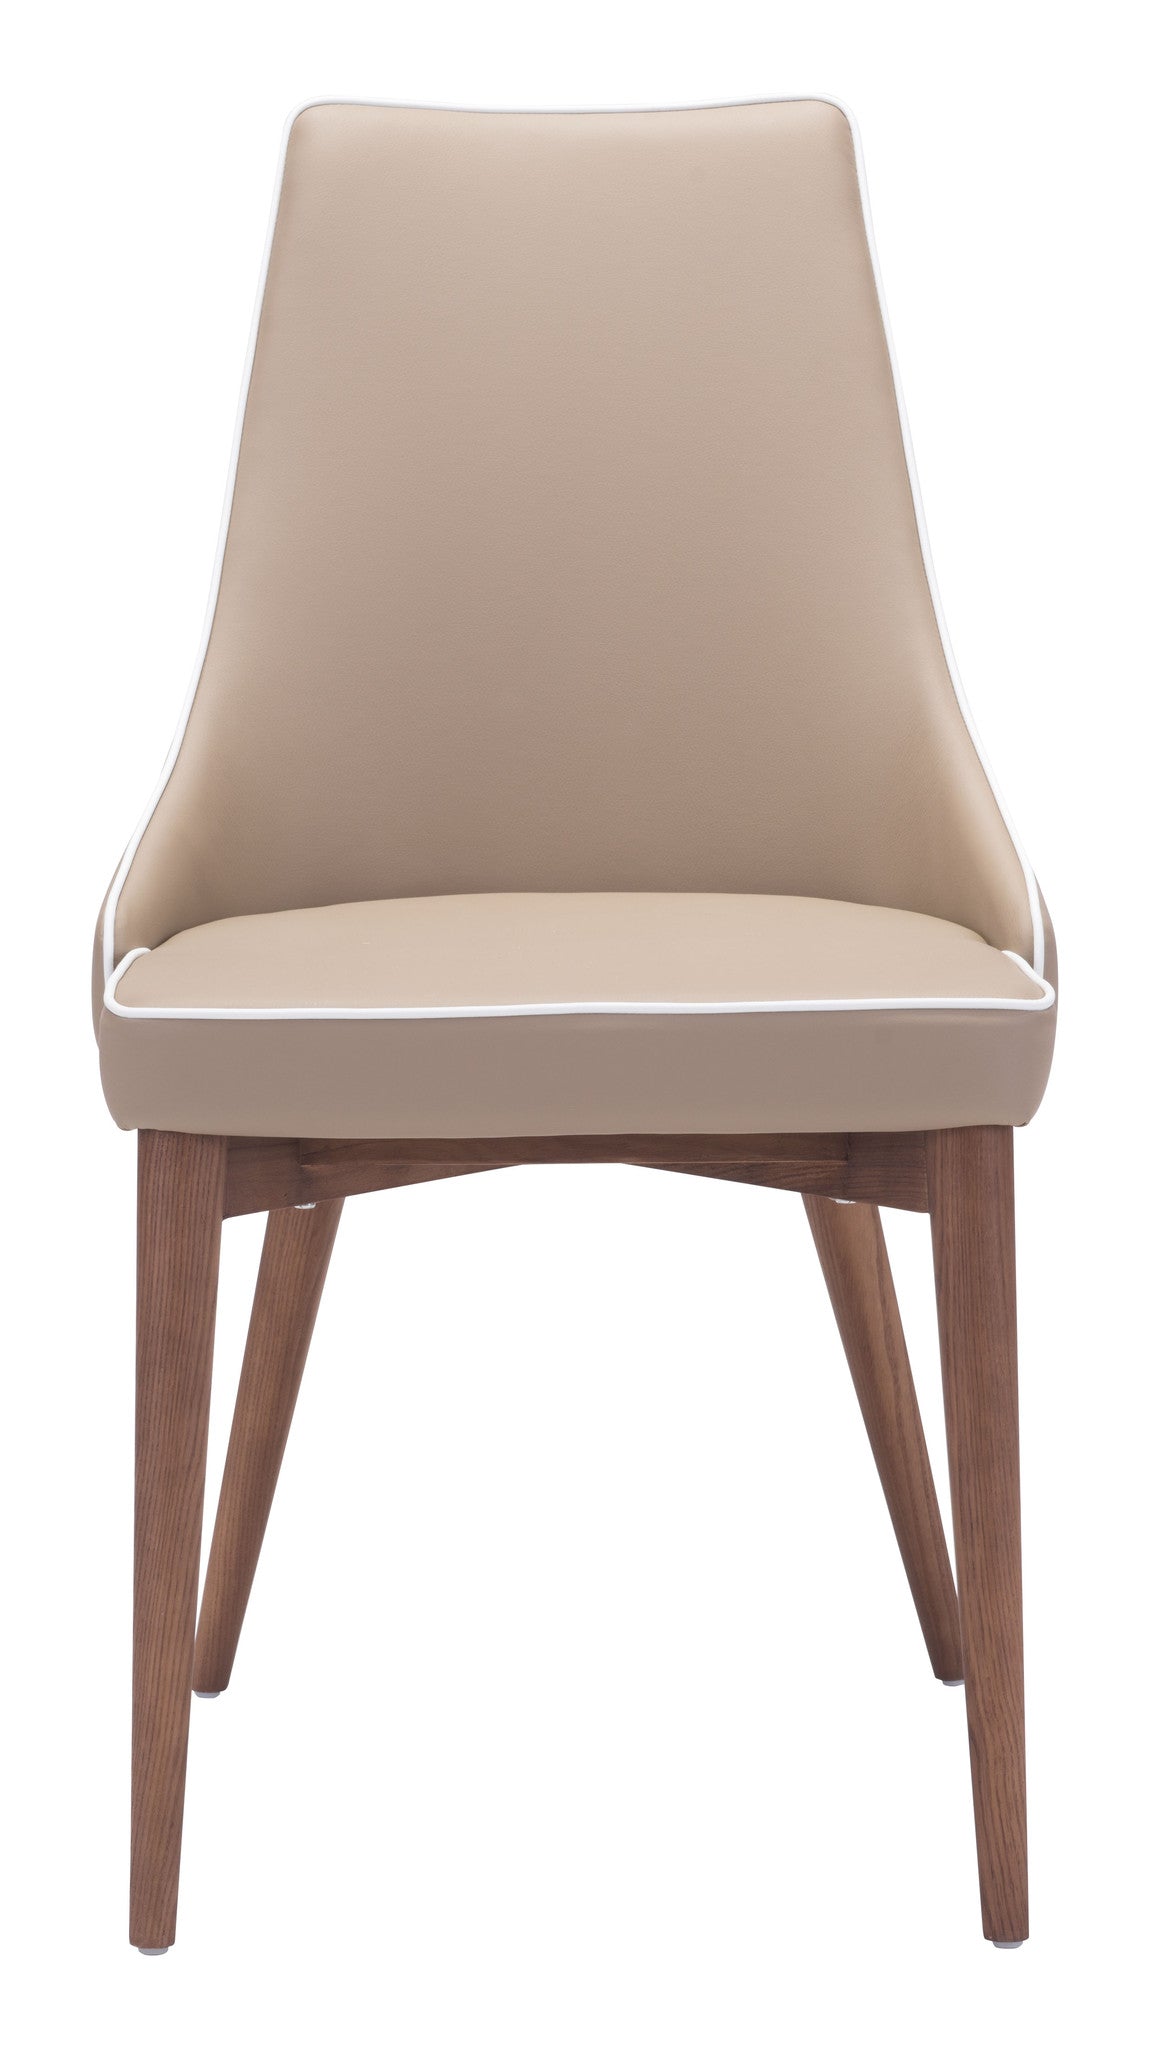 Mastery Dining Chair Beige (Set of 2)